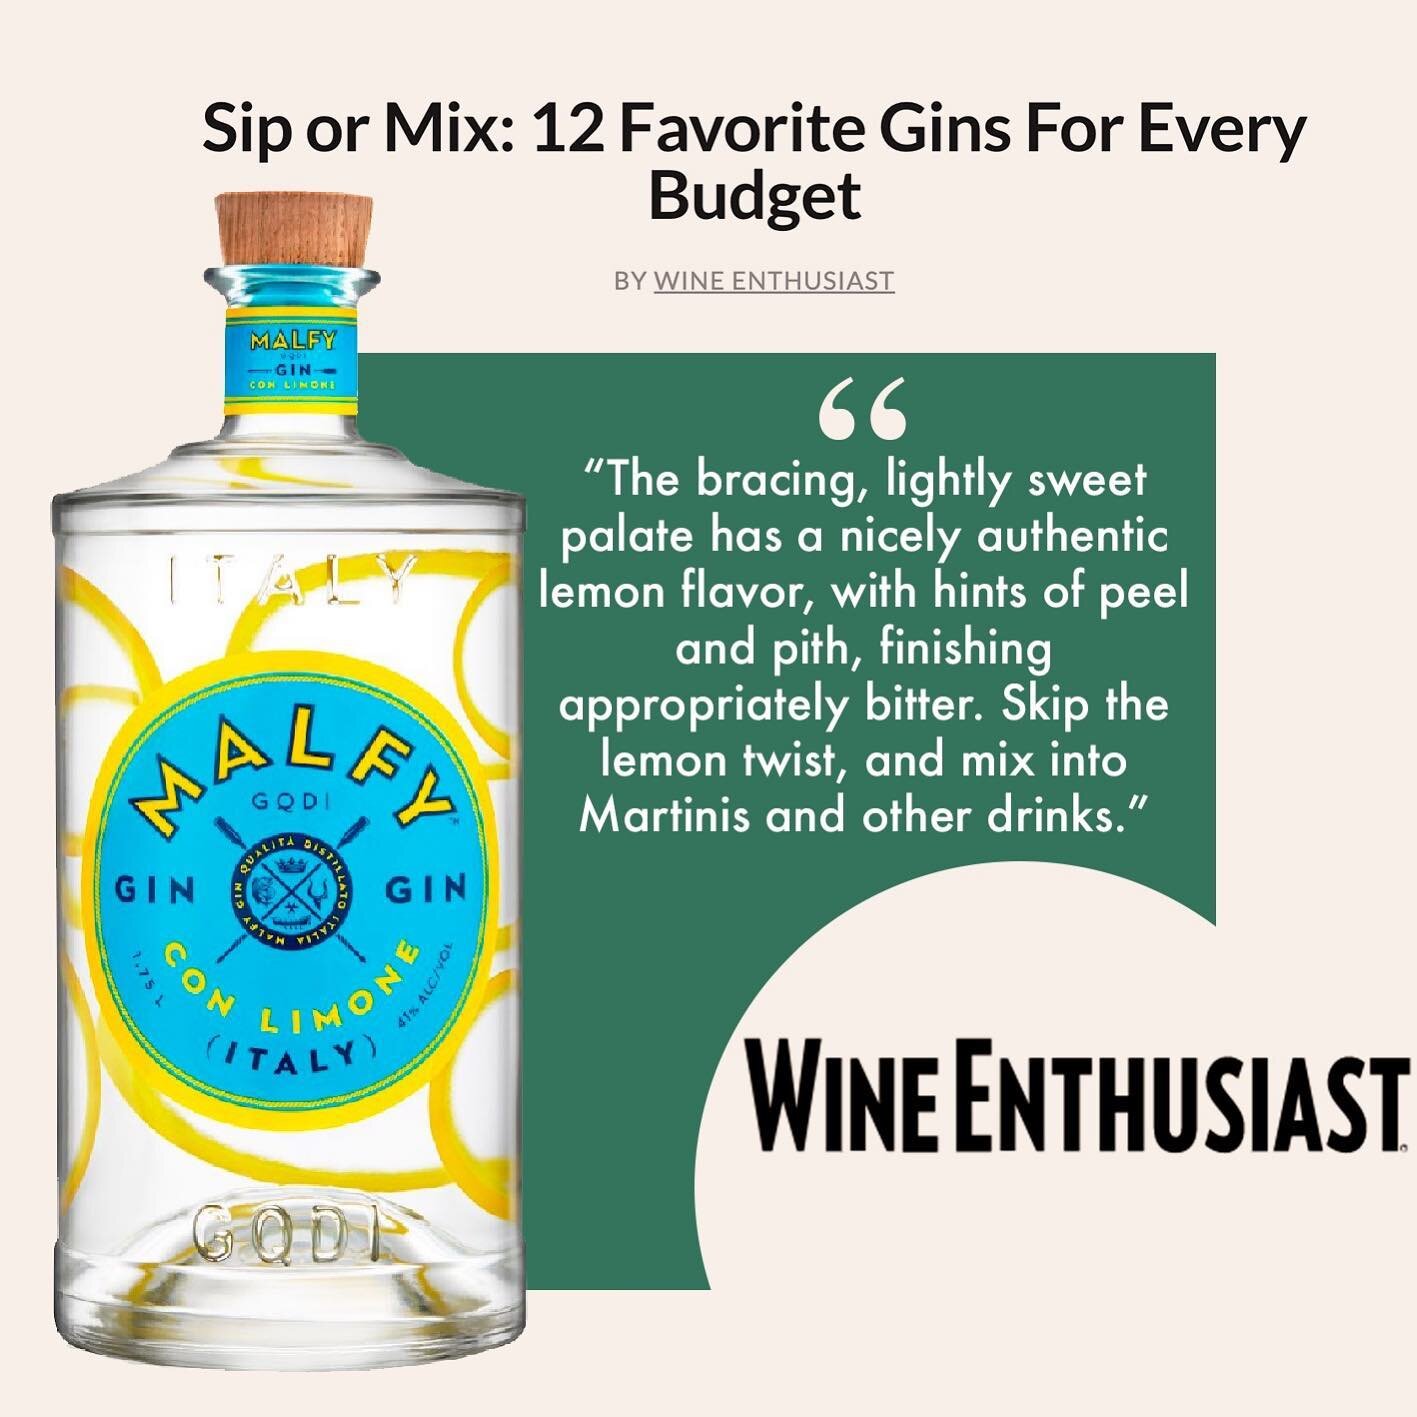 &ldquo;Skip the lemon twist, and mix straight into Martinis and other drinks.&rdquo; 
-Wine Enthusiast

We know what we will be drinking all summer long🙌🏼🍸🍋